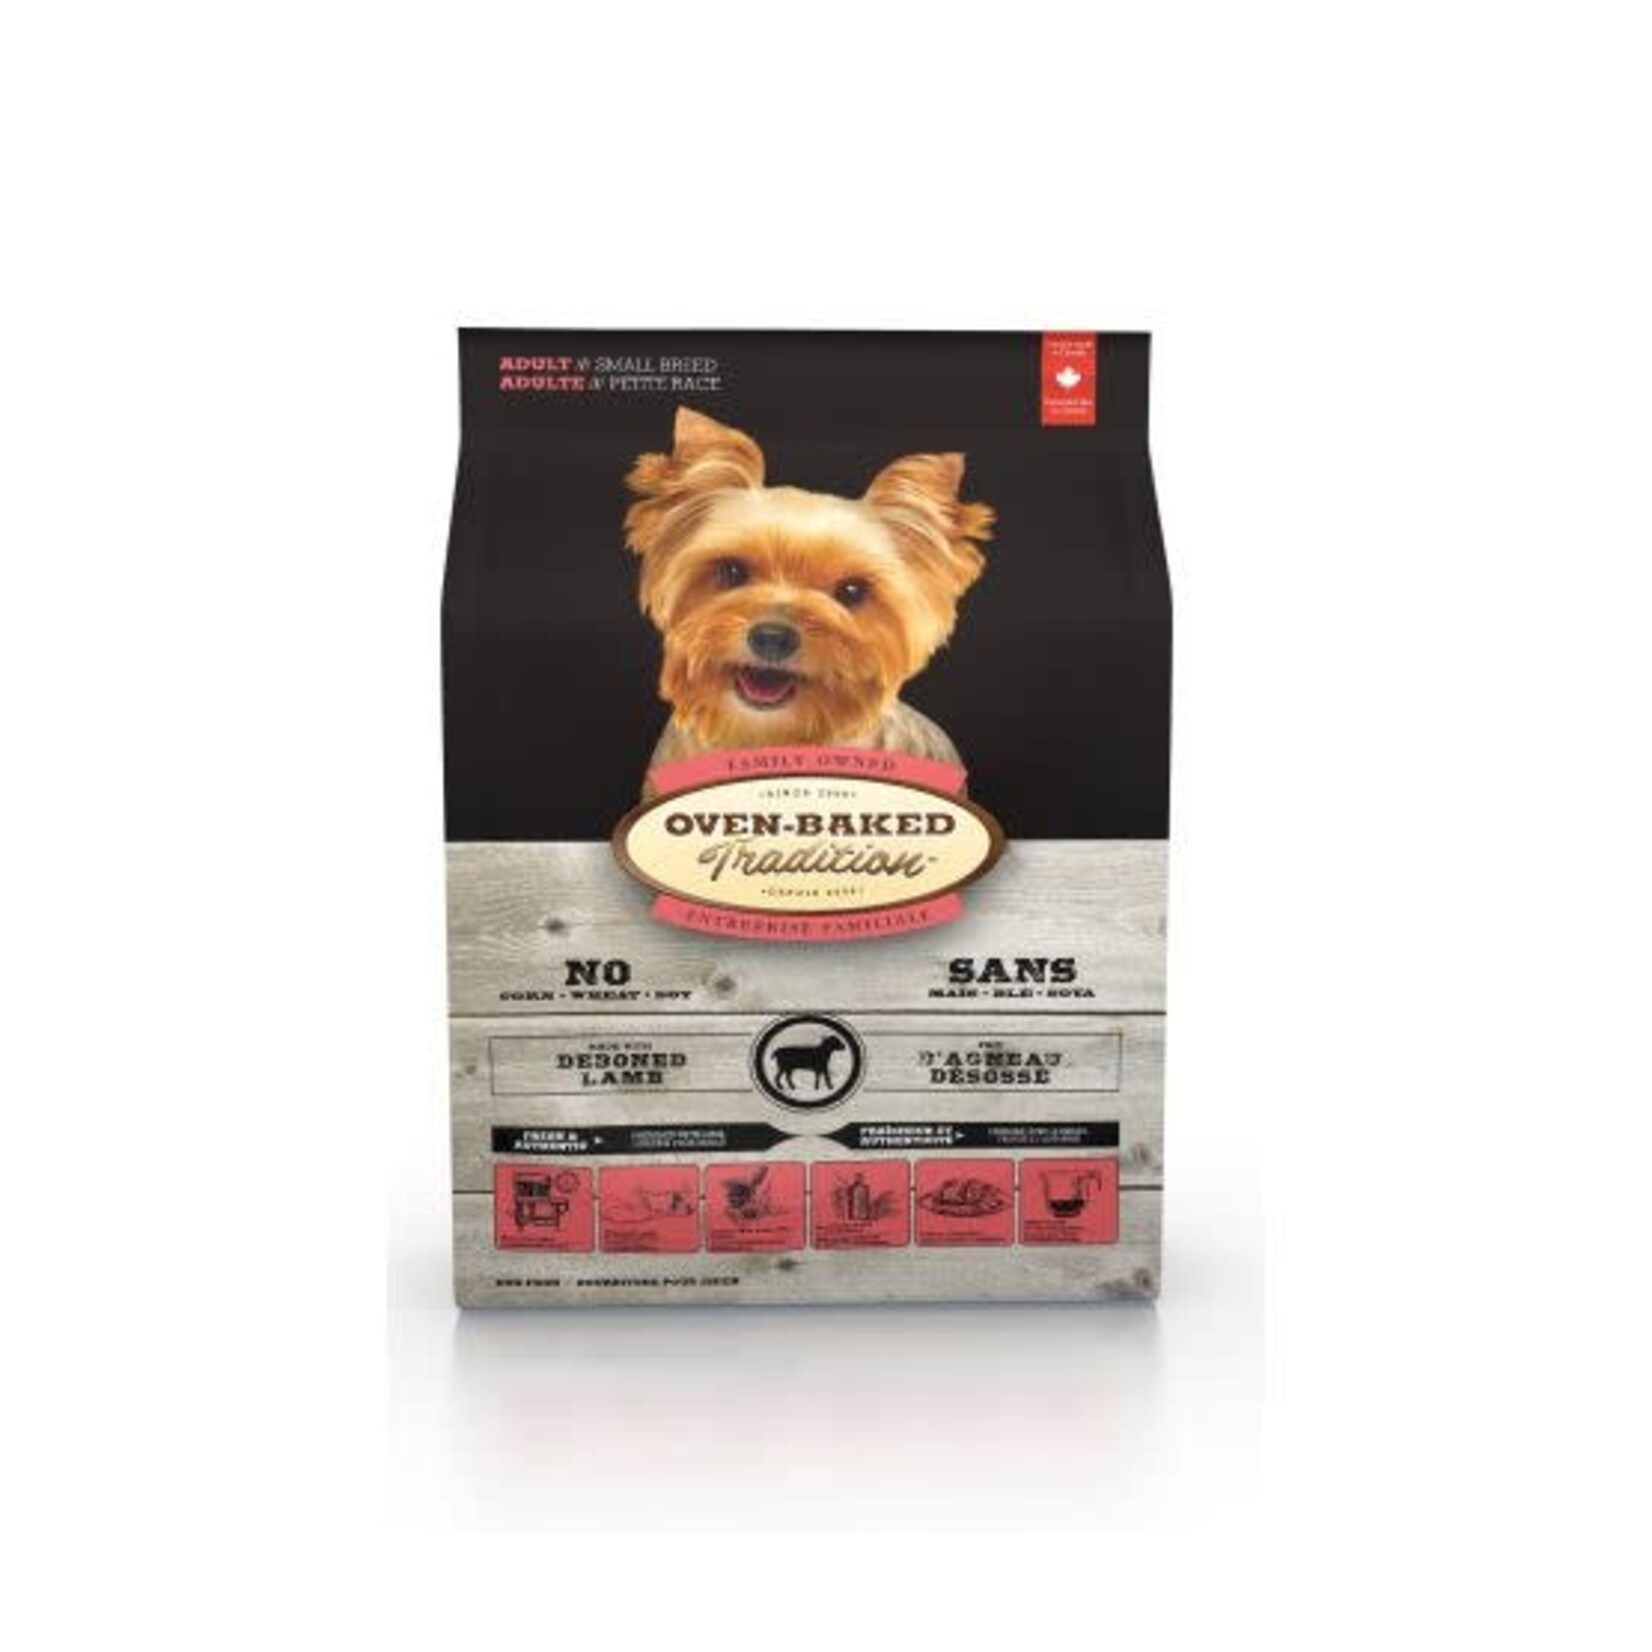 OVEN-BAKED OVEN BAKED CHIEN PETITE RACE - AGNEAU 2.27 KG